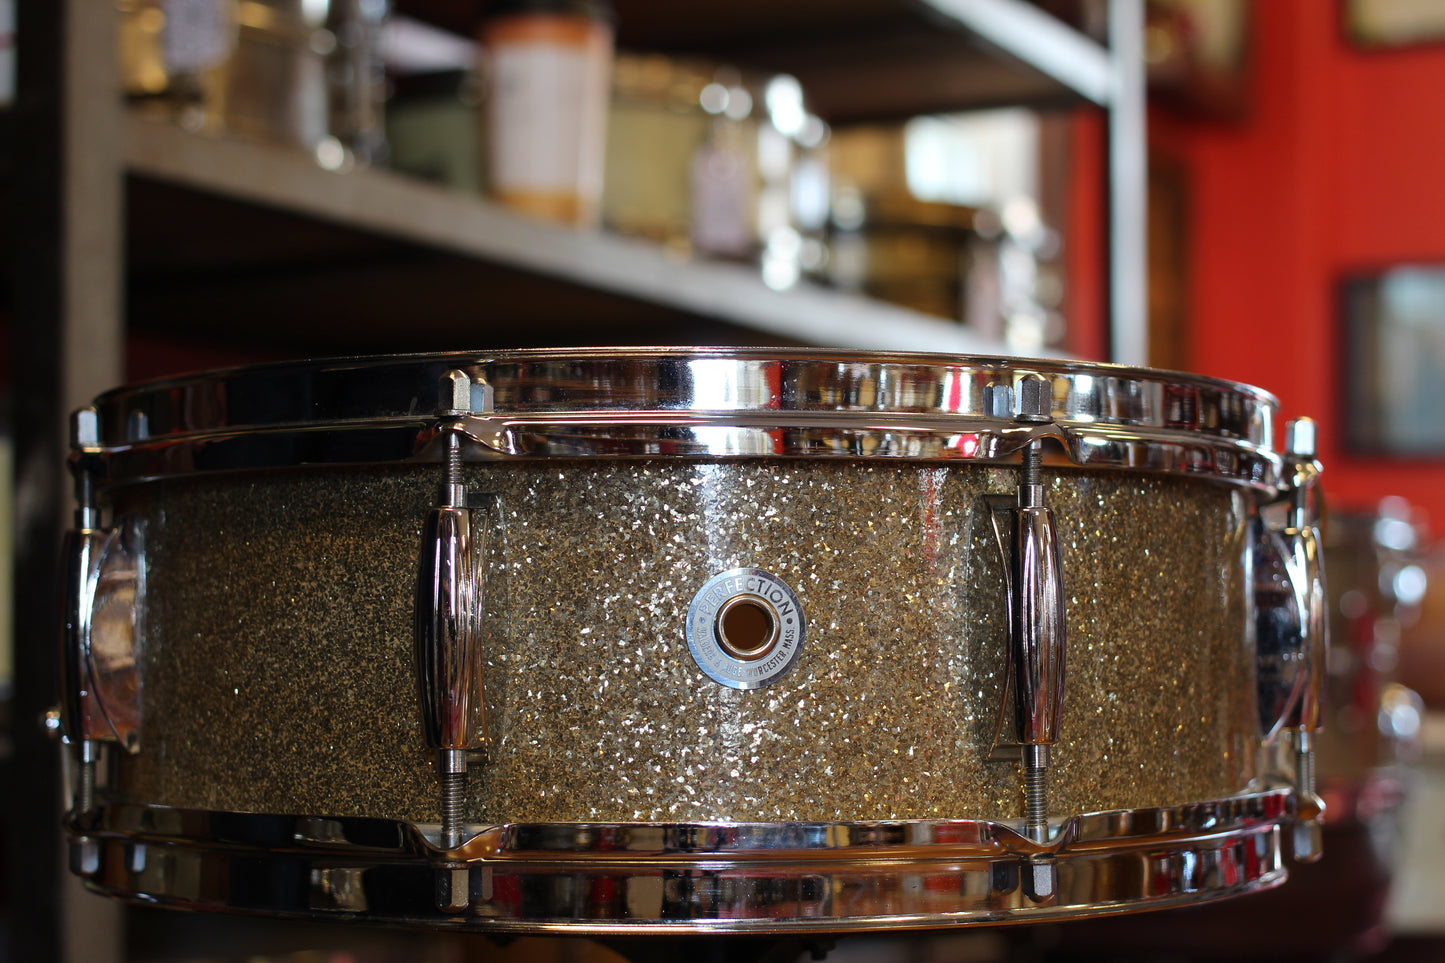 1967 Walberg & Auge 'Perfection' Drum Kit in Ginger Ale Sparkle 14x20 16x14 8x12 5x14